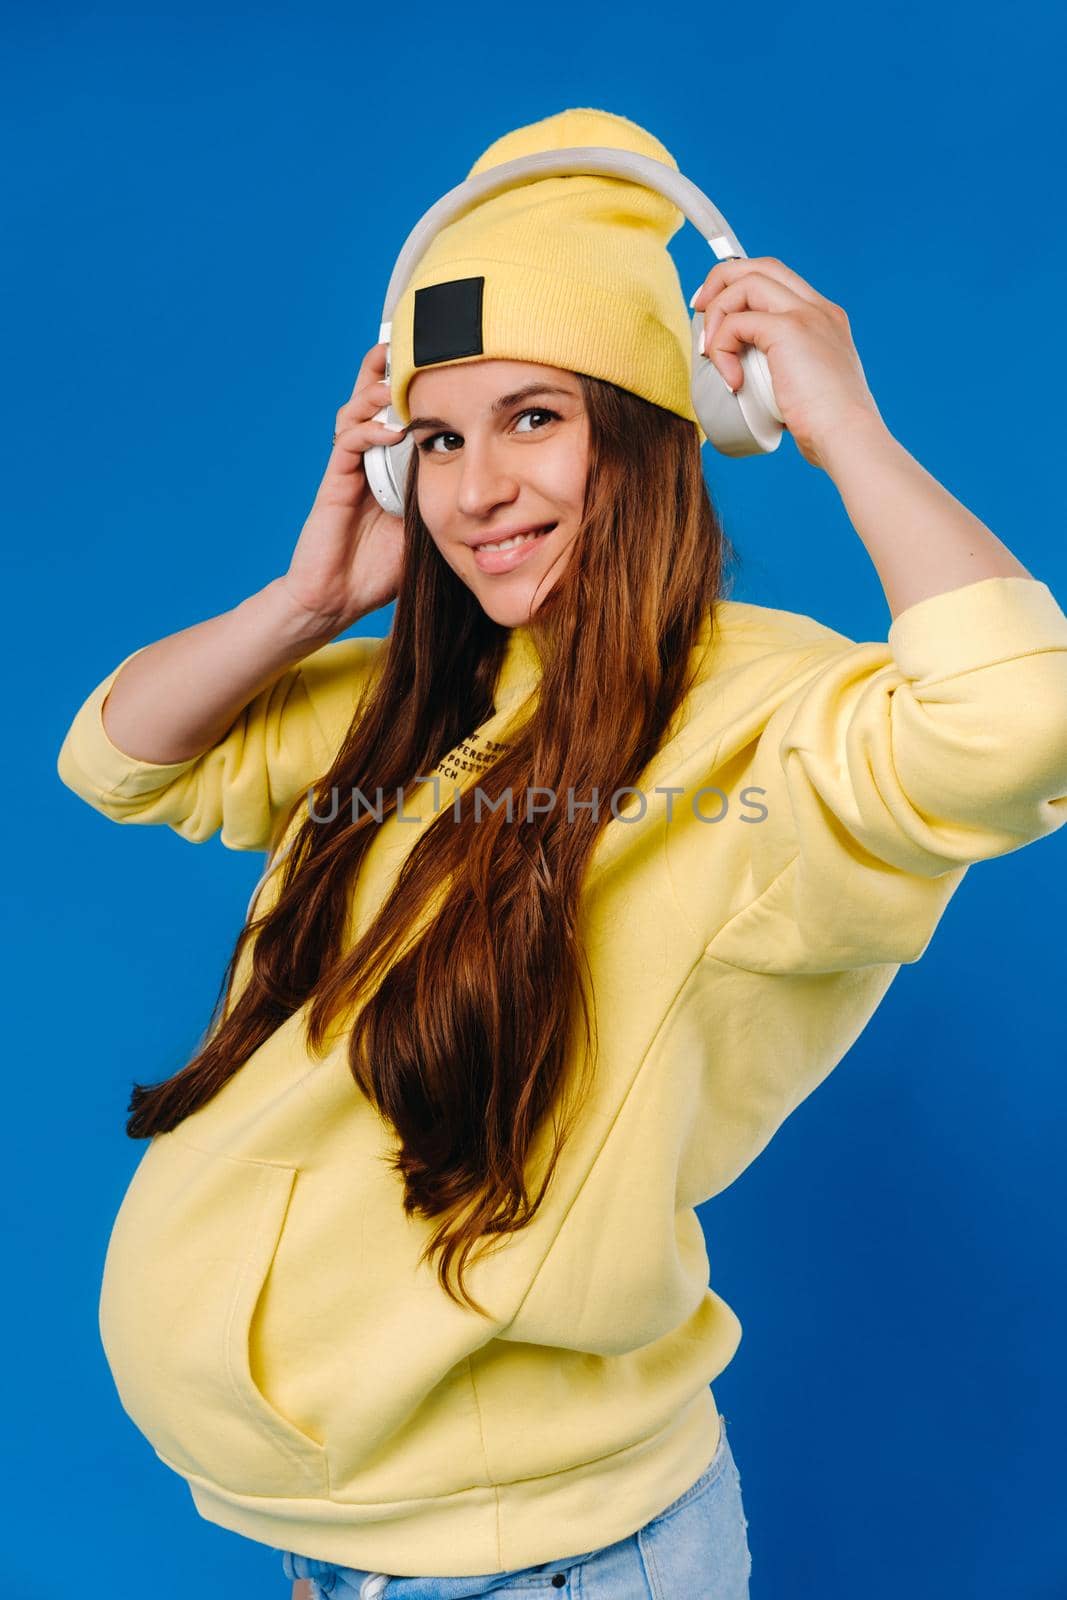 A pregnant girl in a yellow jacket and headphones stands on a blue background by Lobachad